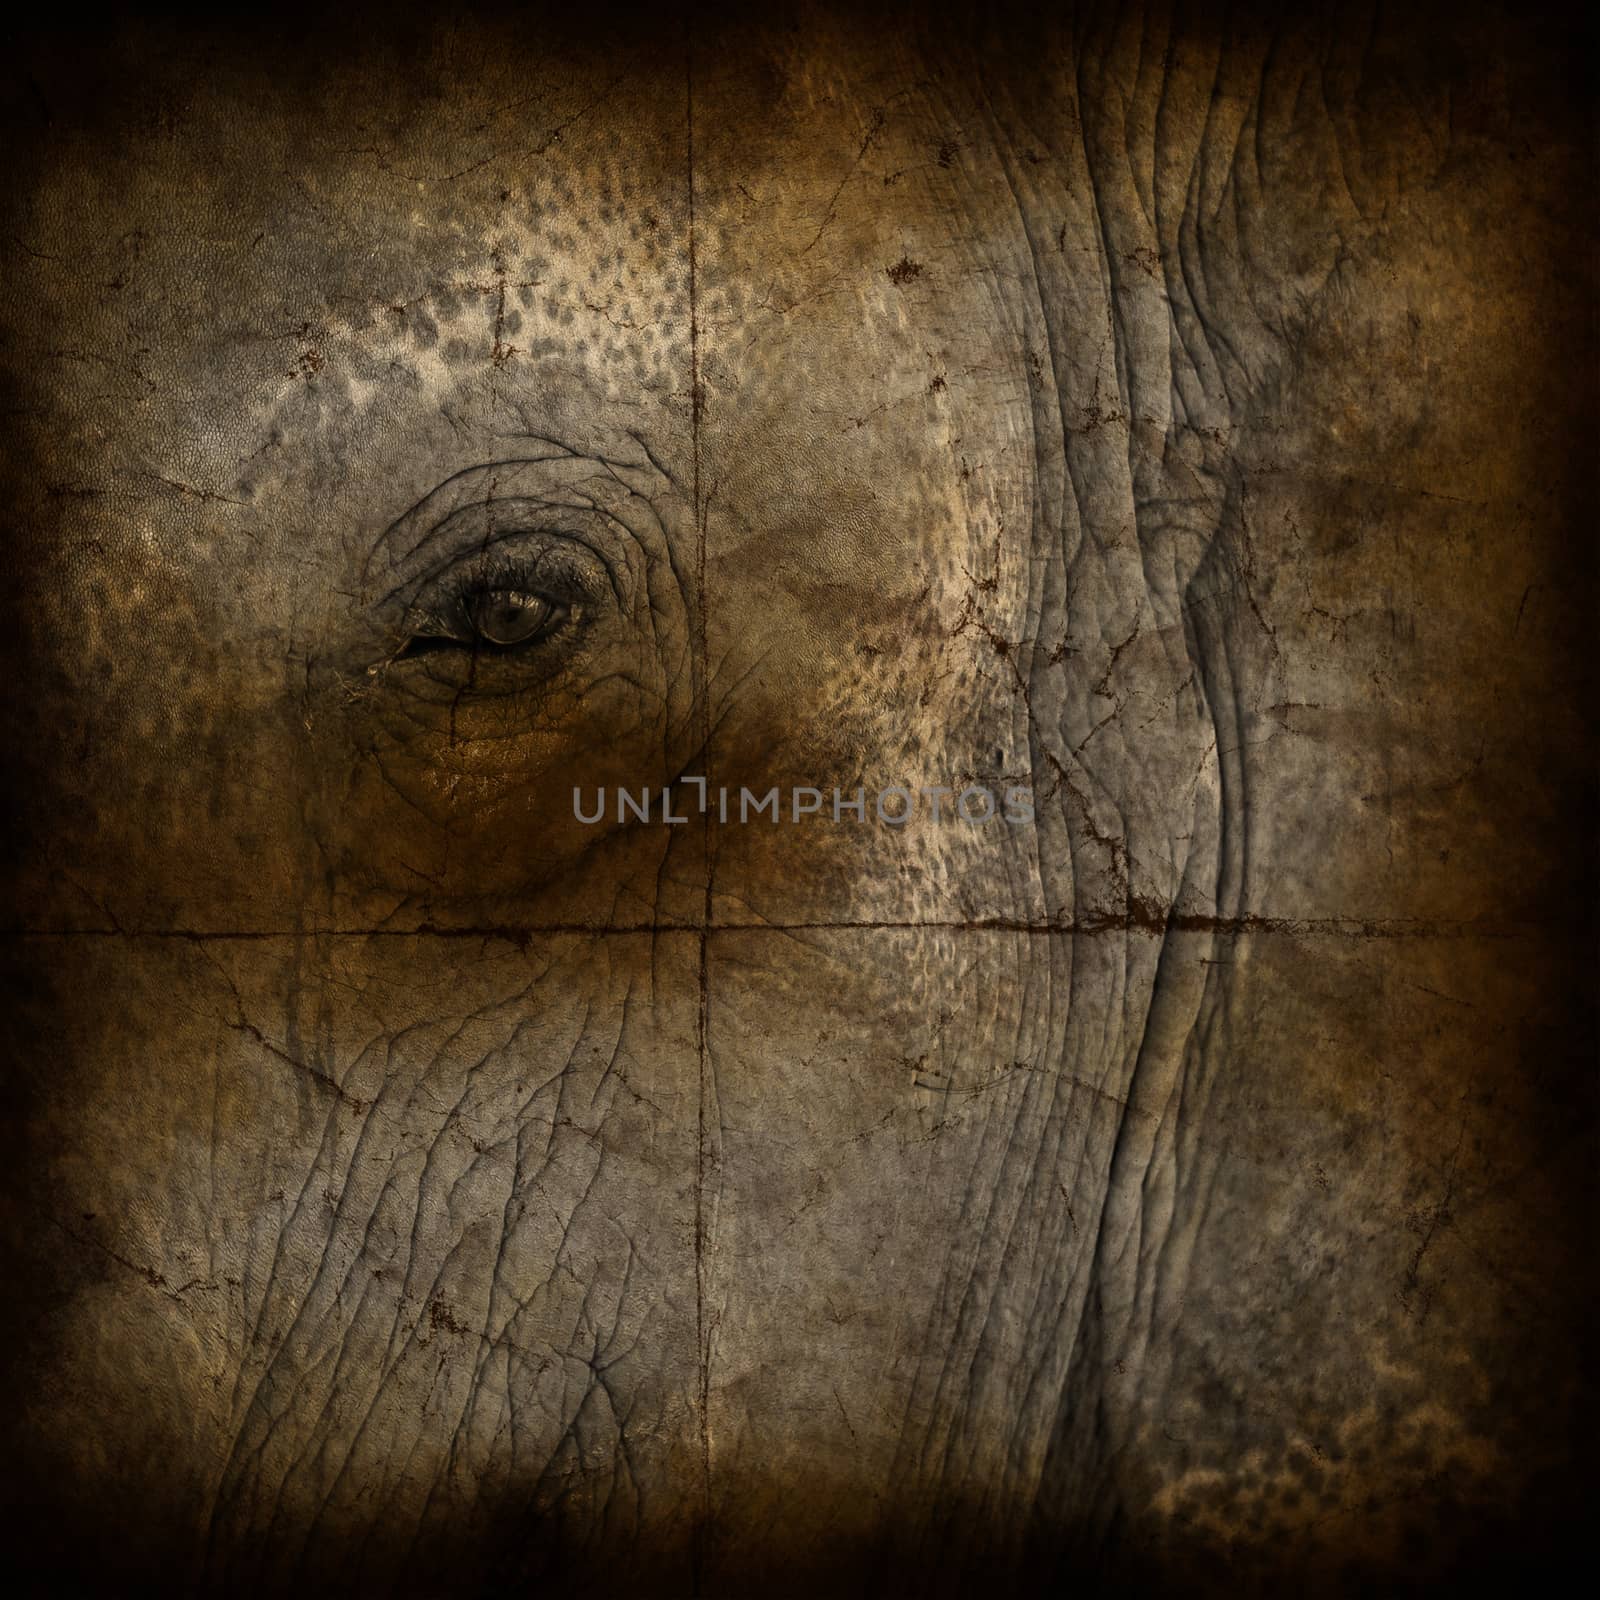 the texture, vintage background of the elephant skin design on grunge paper